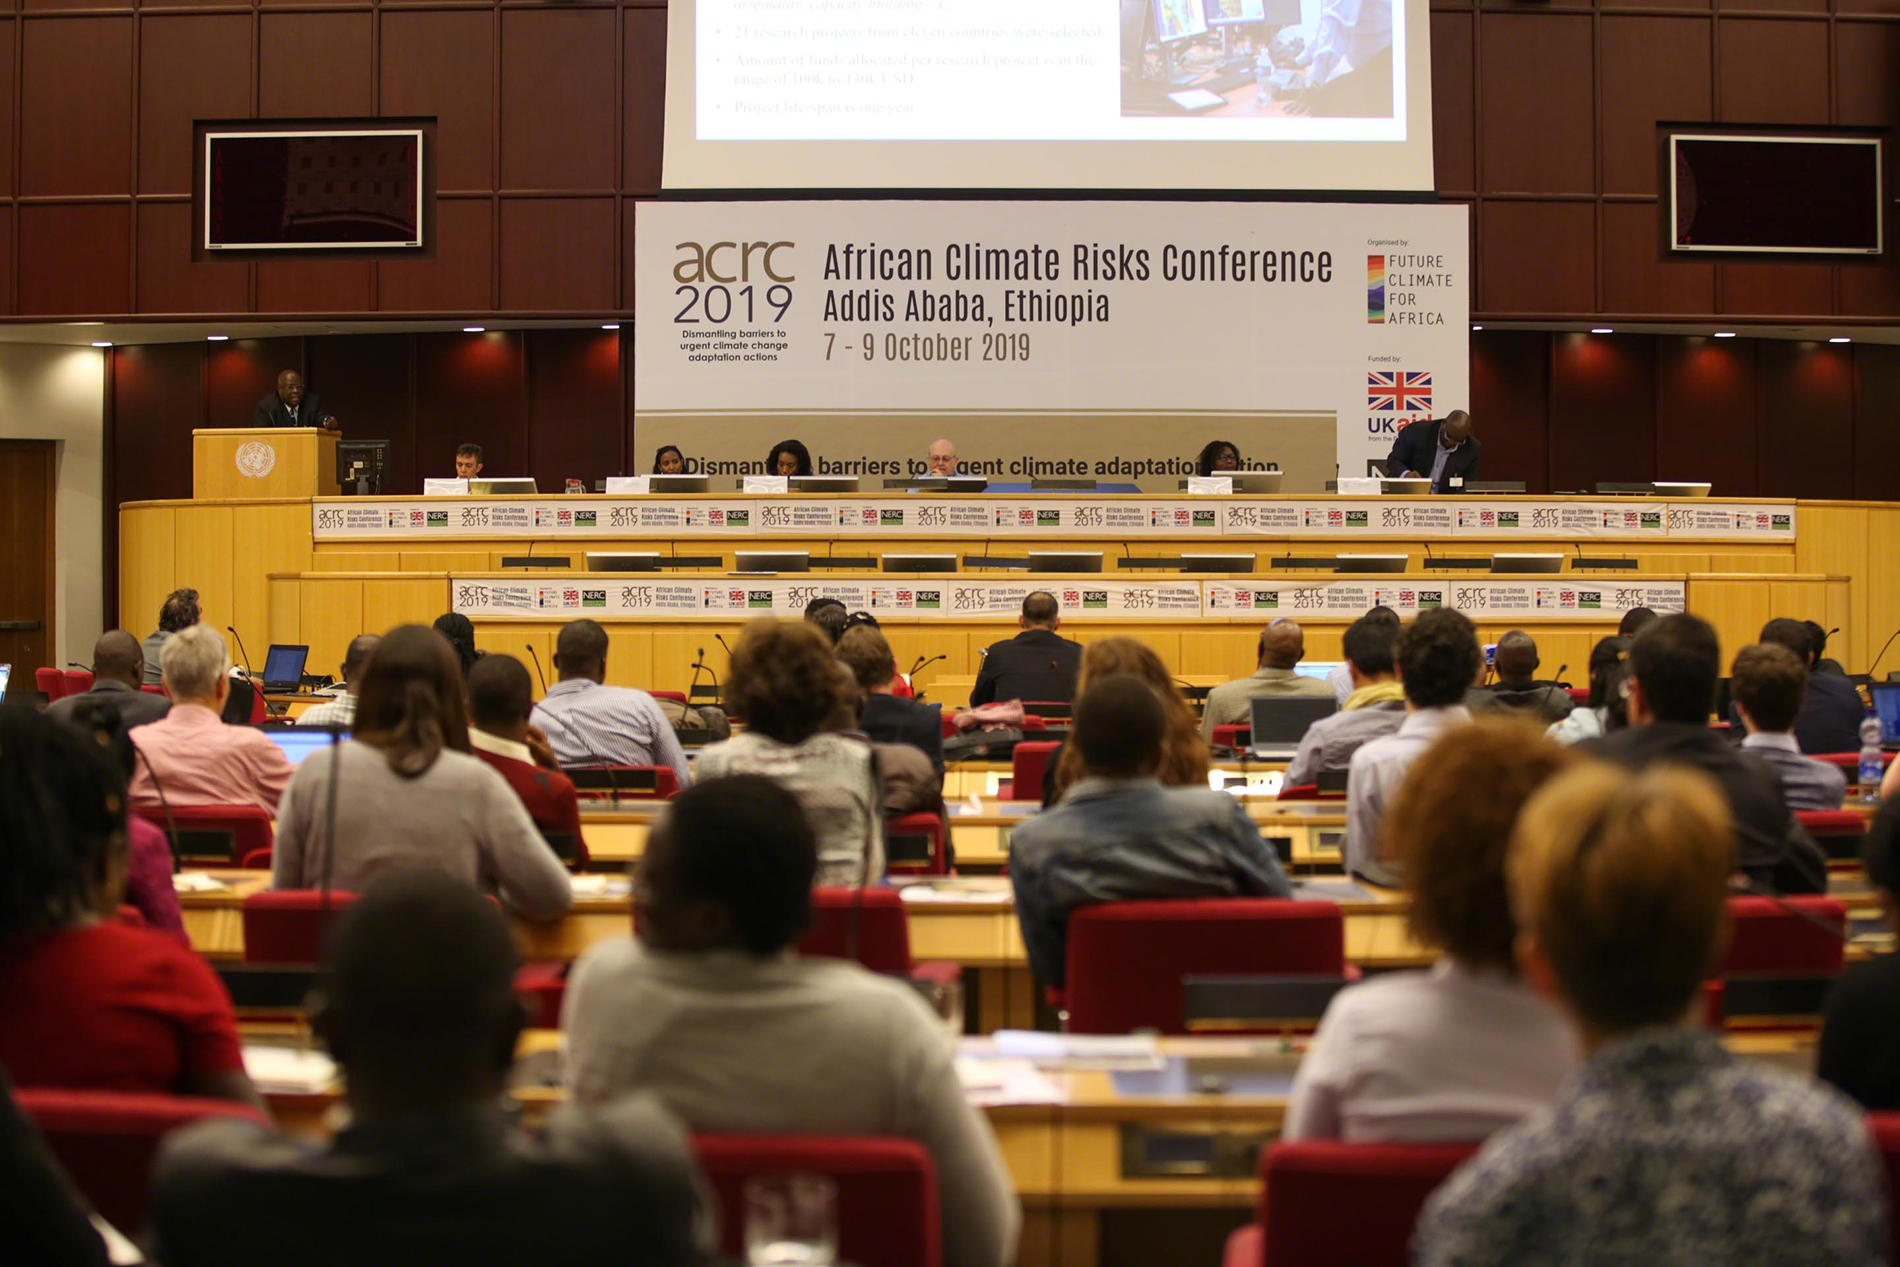 African Climate Risks Conferences in Ethiopia, October 2019. Photo by IISD/ENB